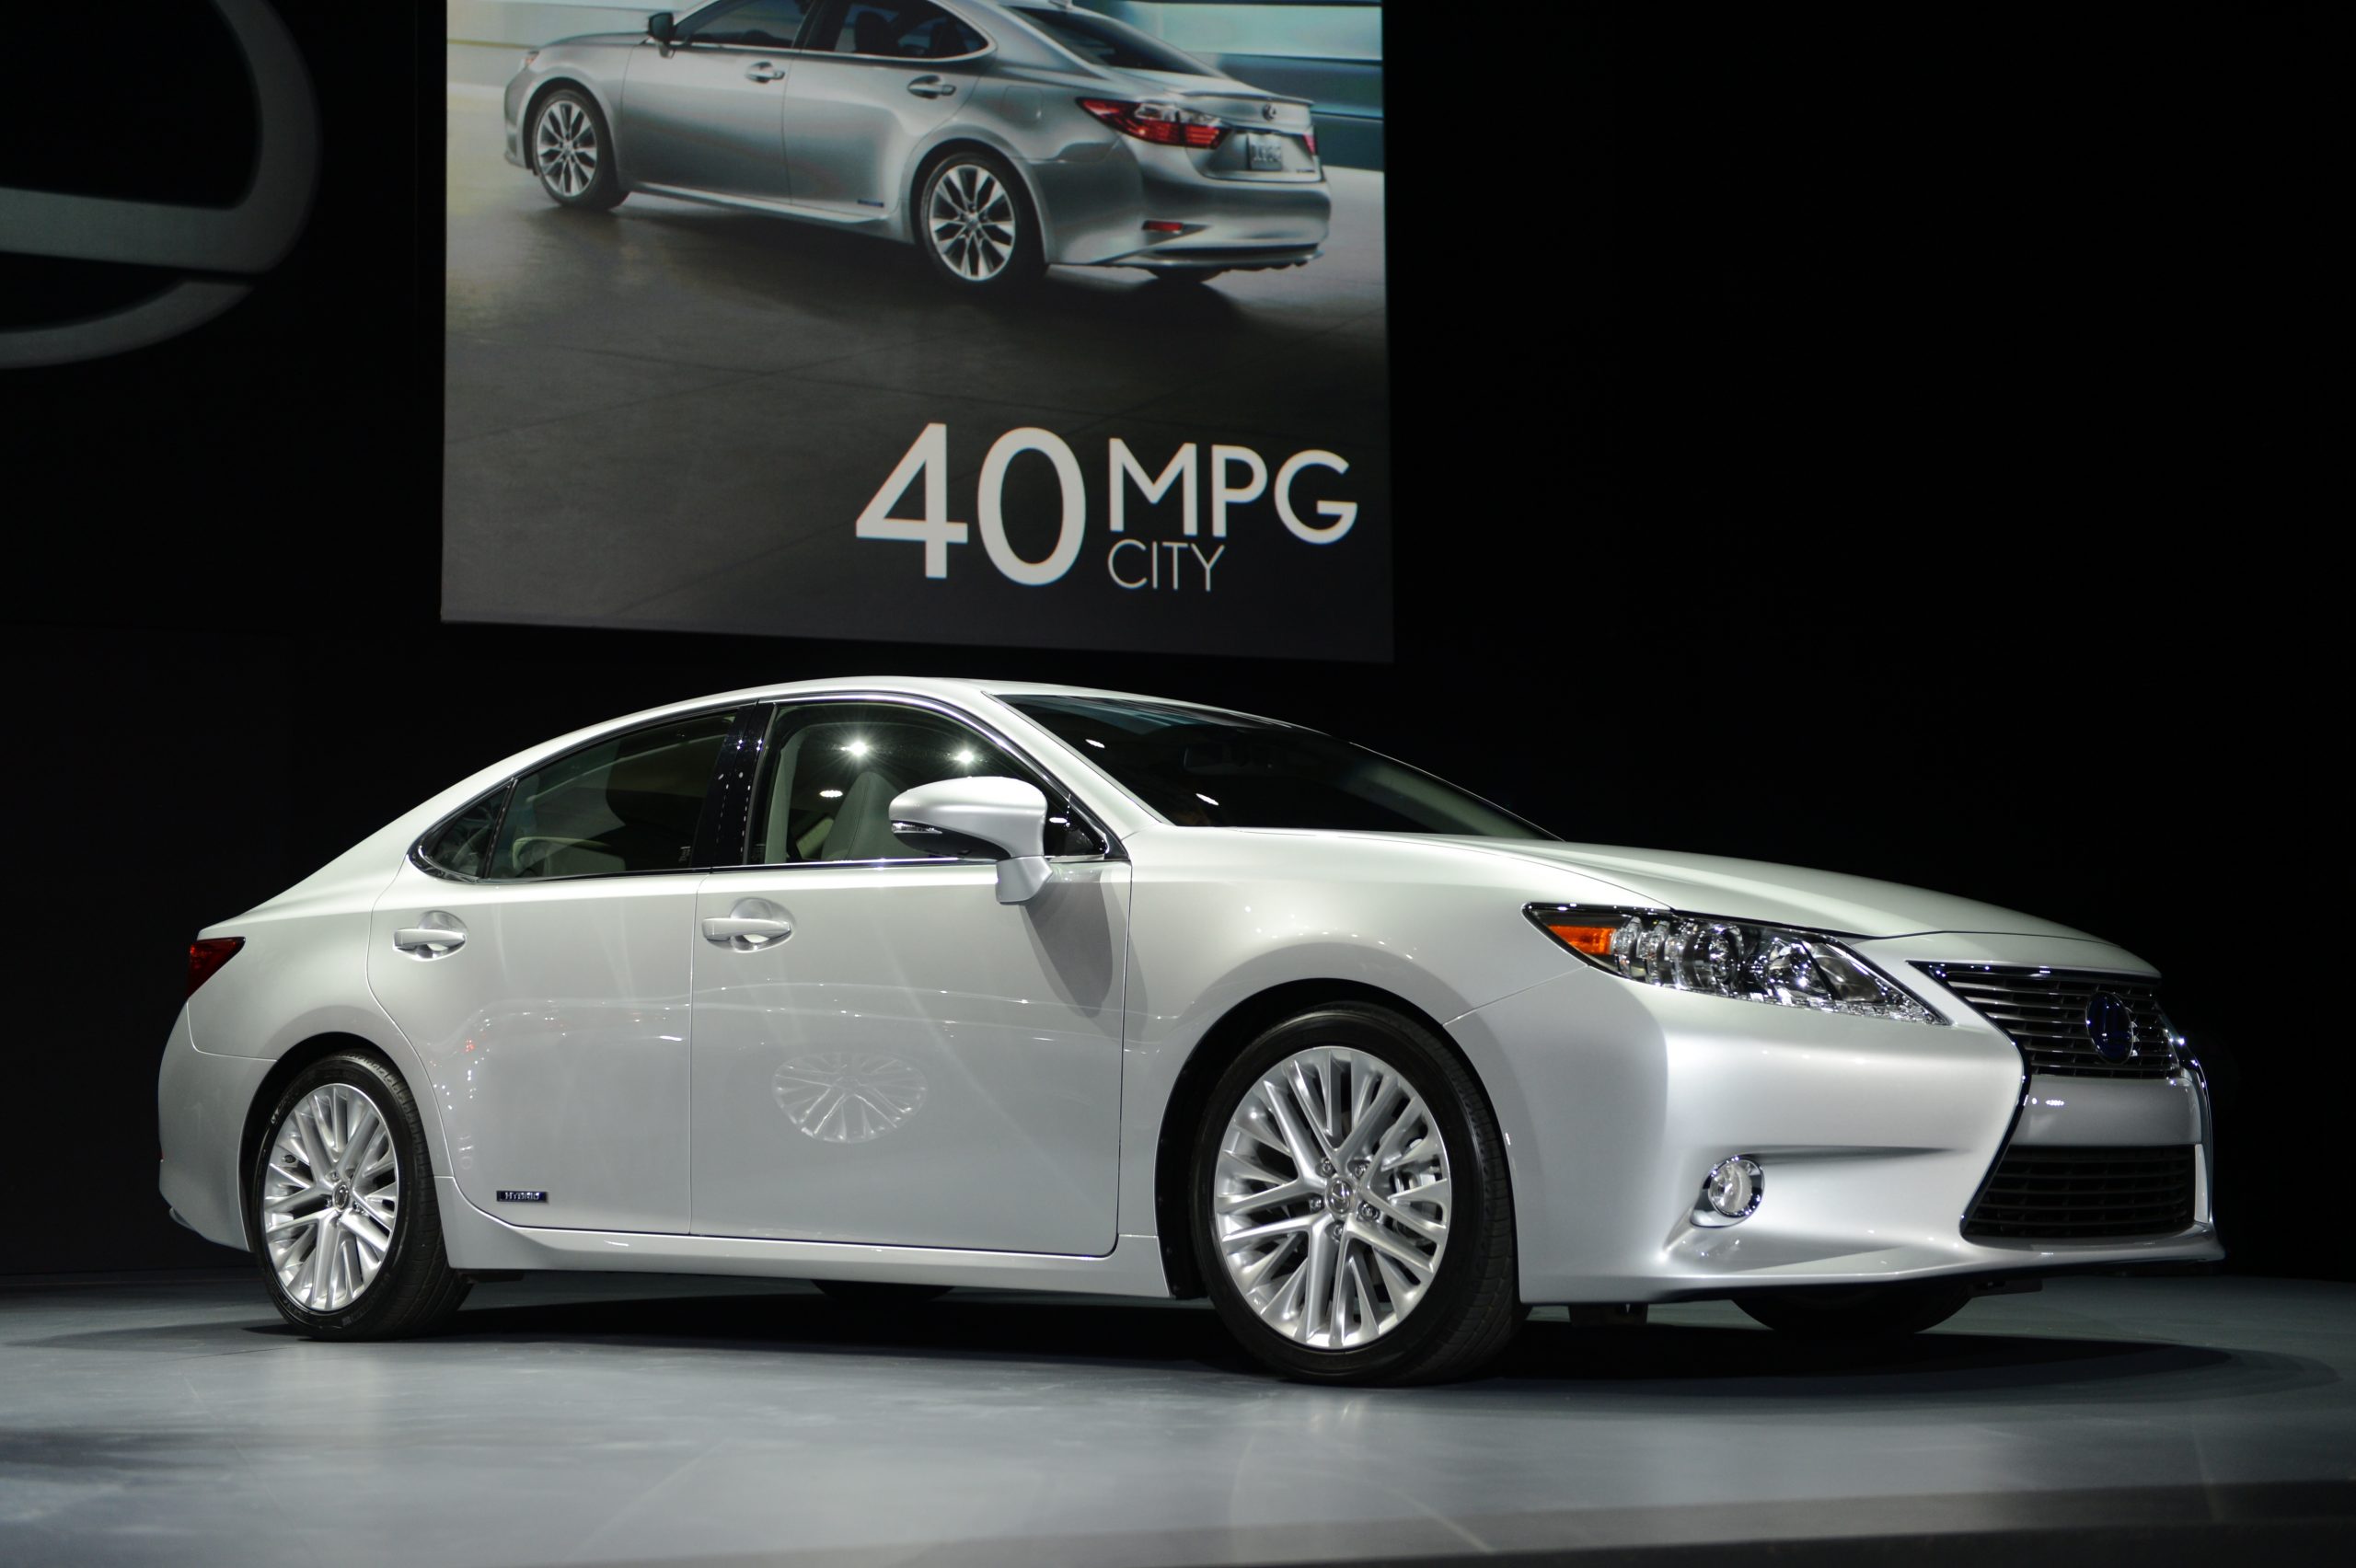 A silver Lexus ES 350 shot from the 3/4 angle at an auto show